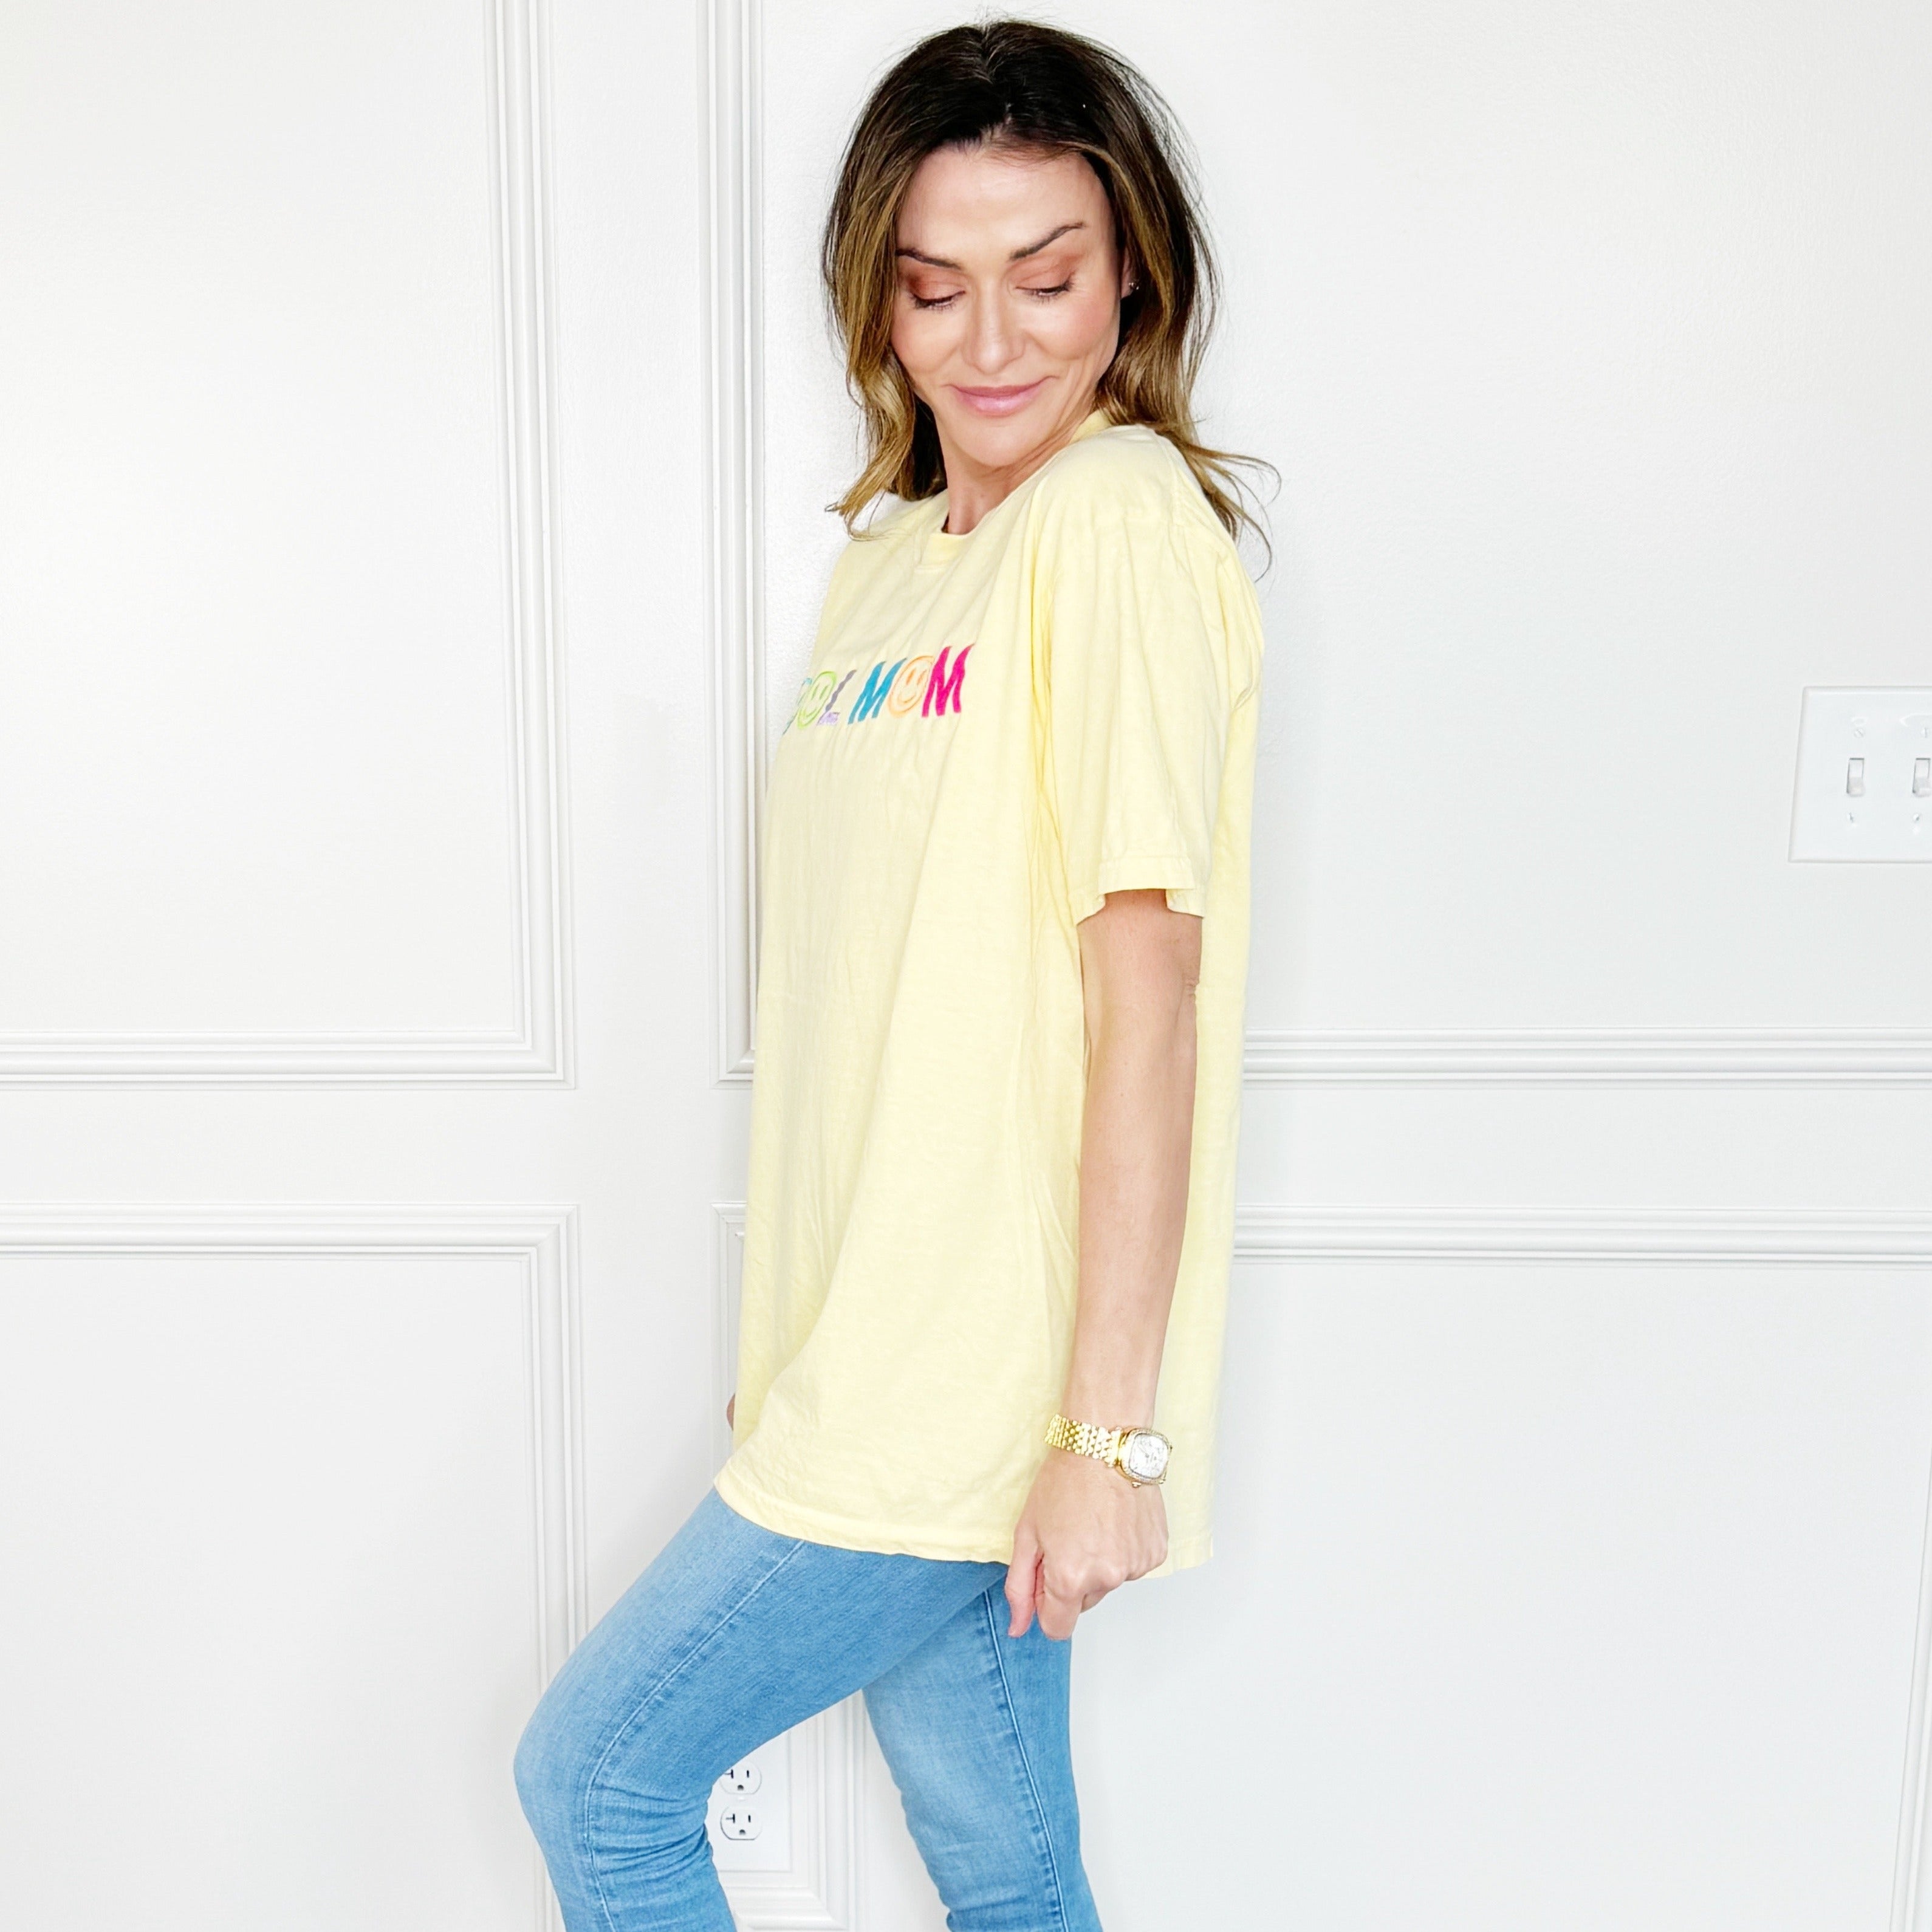 Cool Mom Embroidered Tee